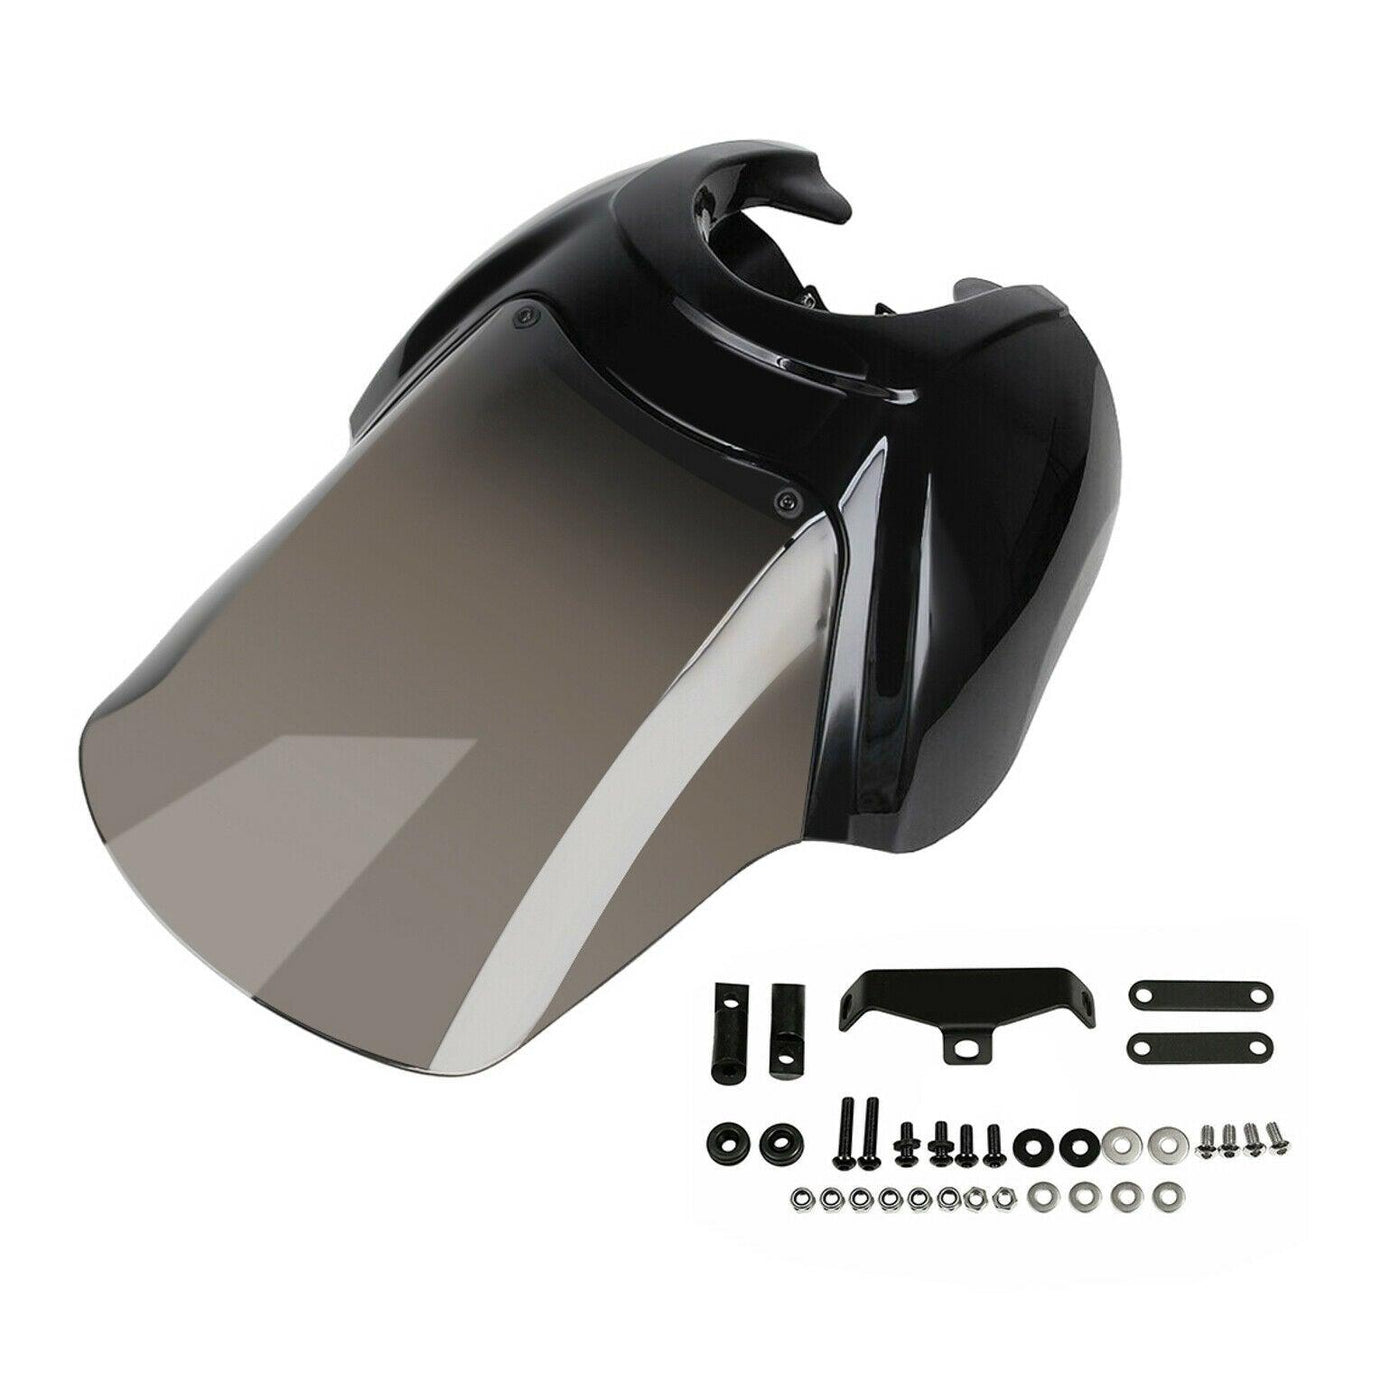 Headlight Fairing With Smoke Windshield Fit for Harley Dyna T-Sport 2006-2017 - Moto Life Products